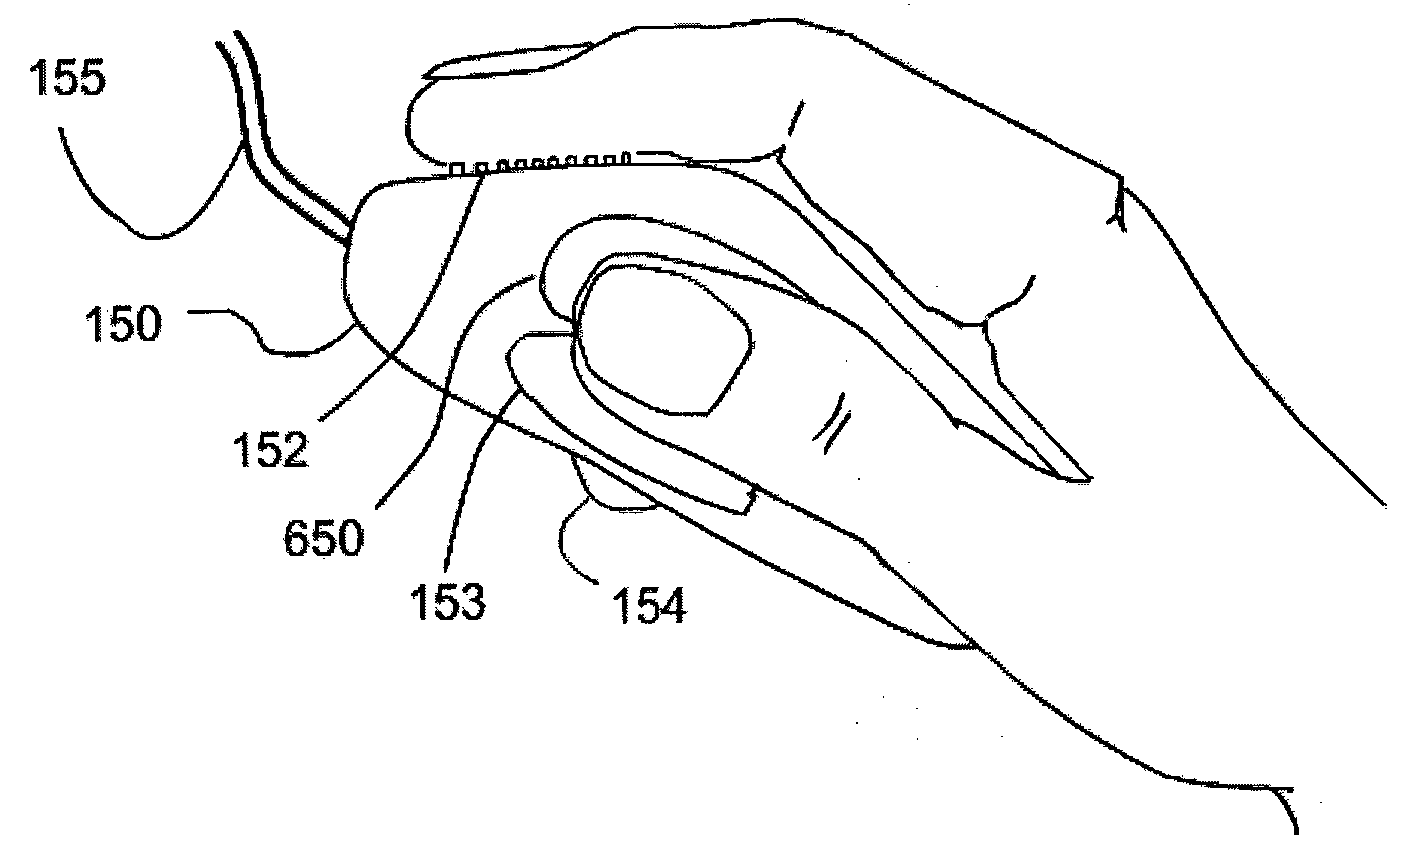 Gesture based computer interface system and method